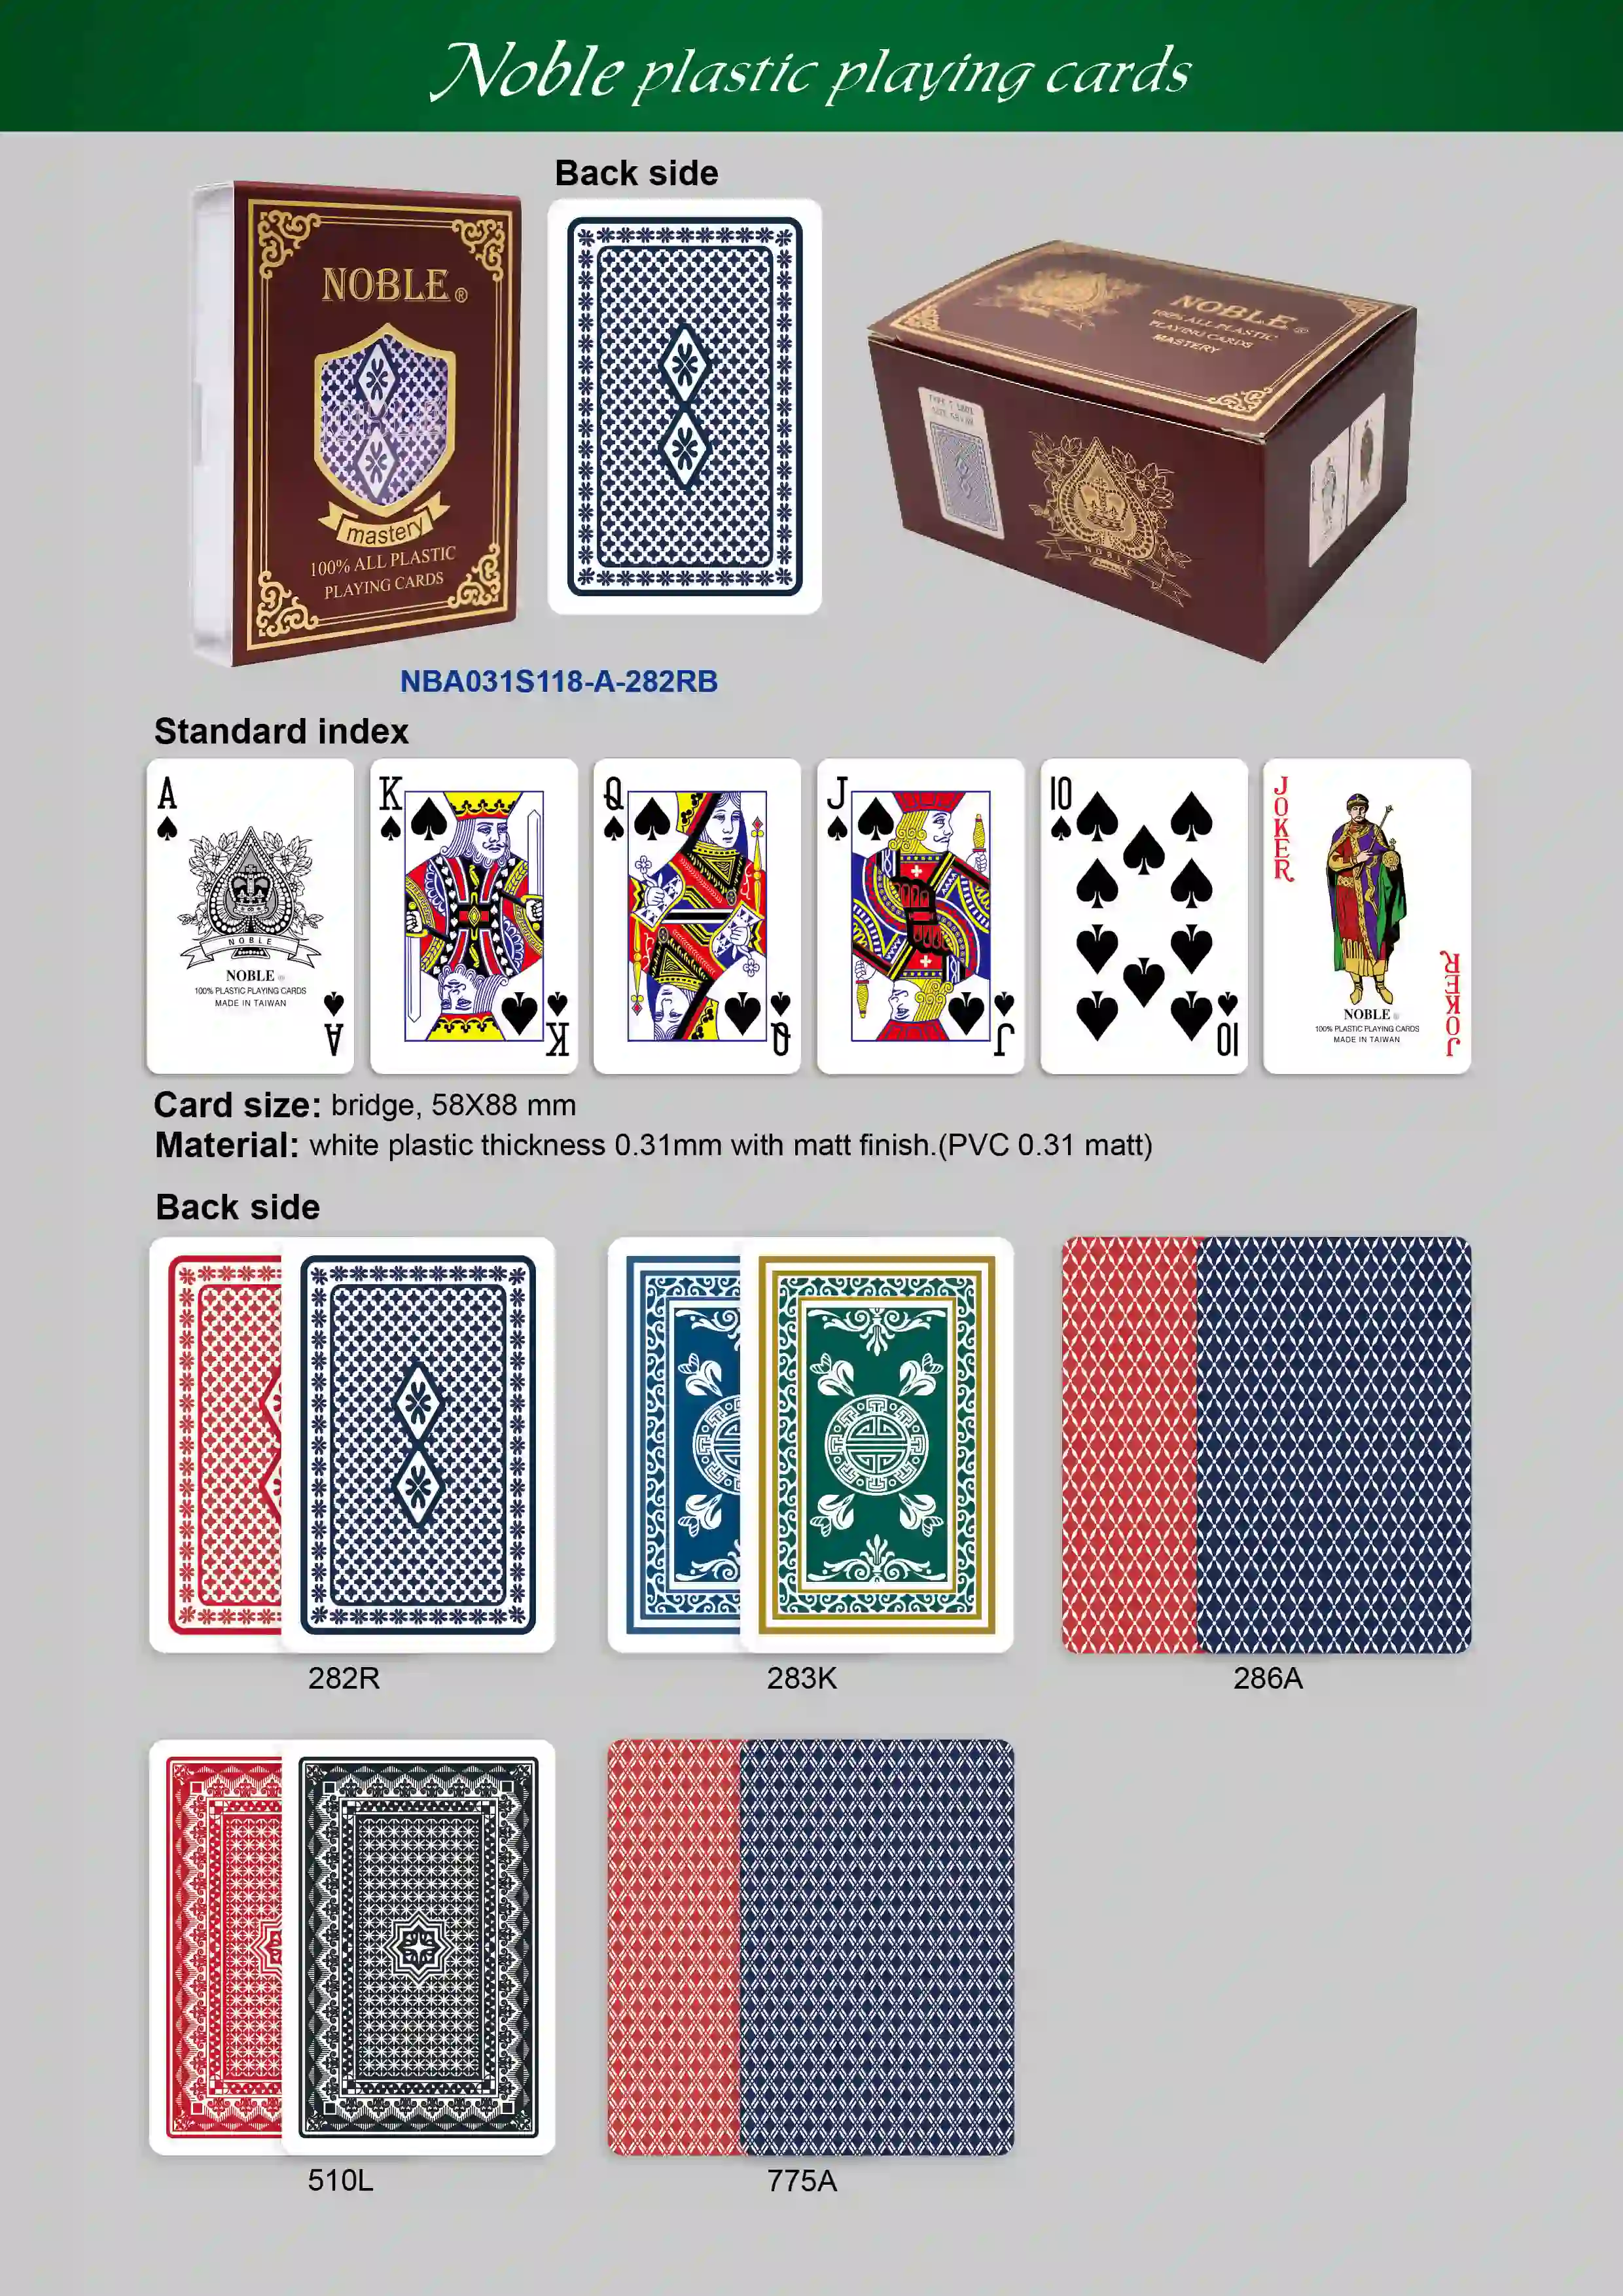  NOBLE Plastic Playing Cards - Standard Index